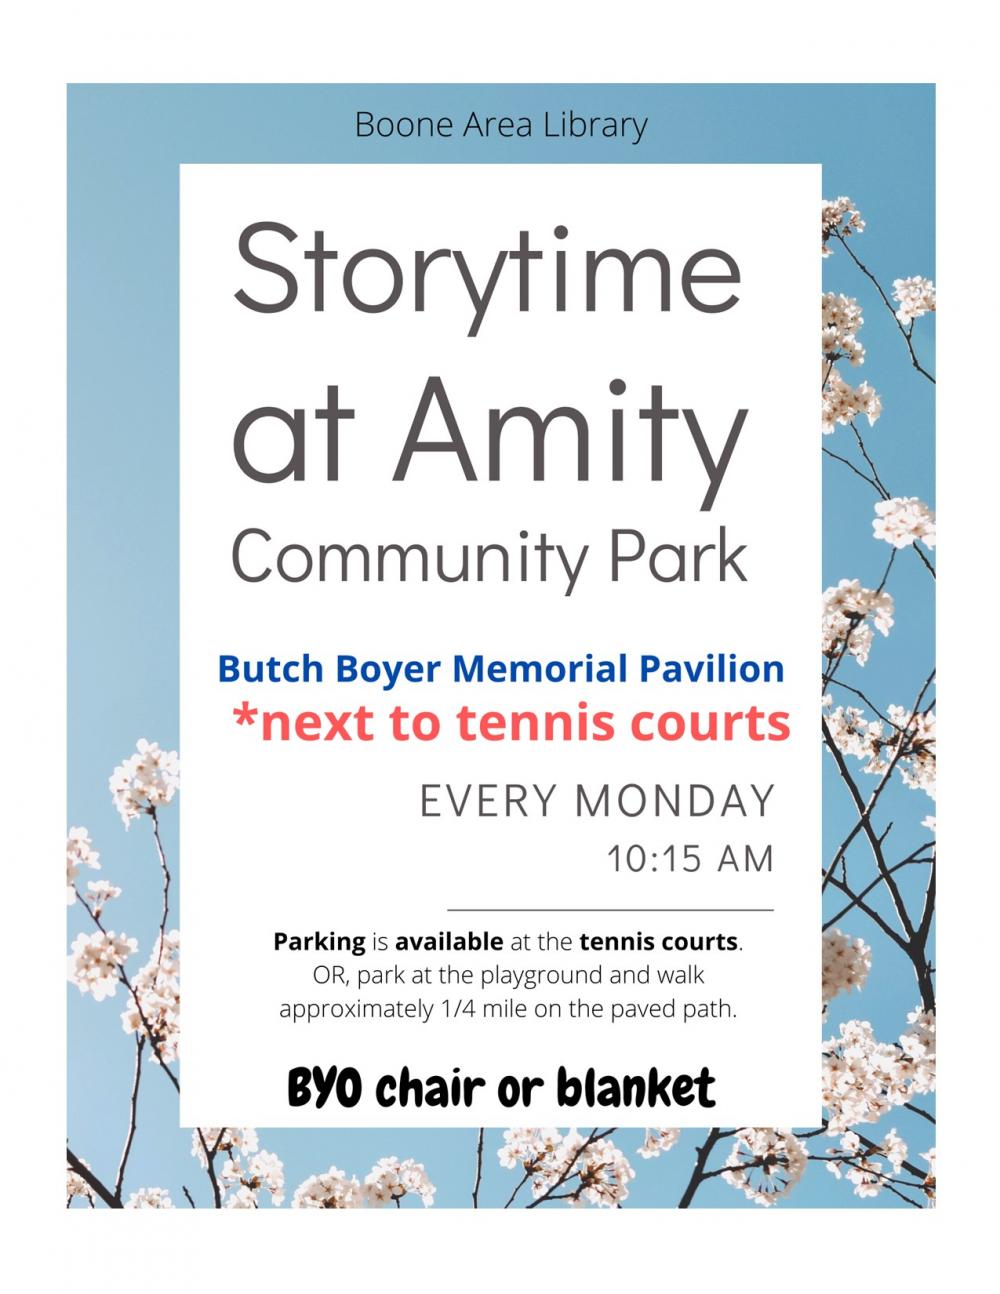 Storytime at Amity